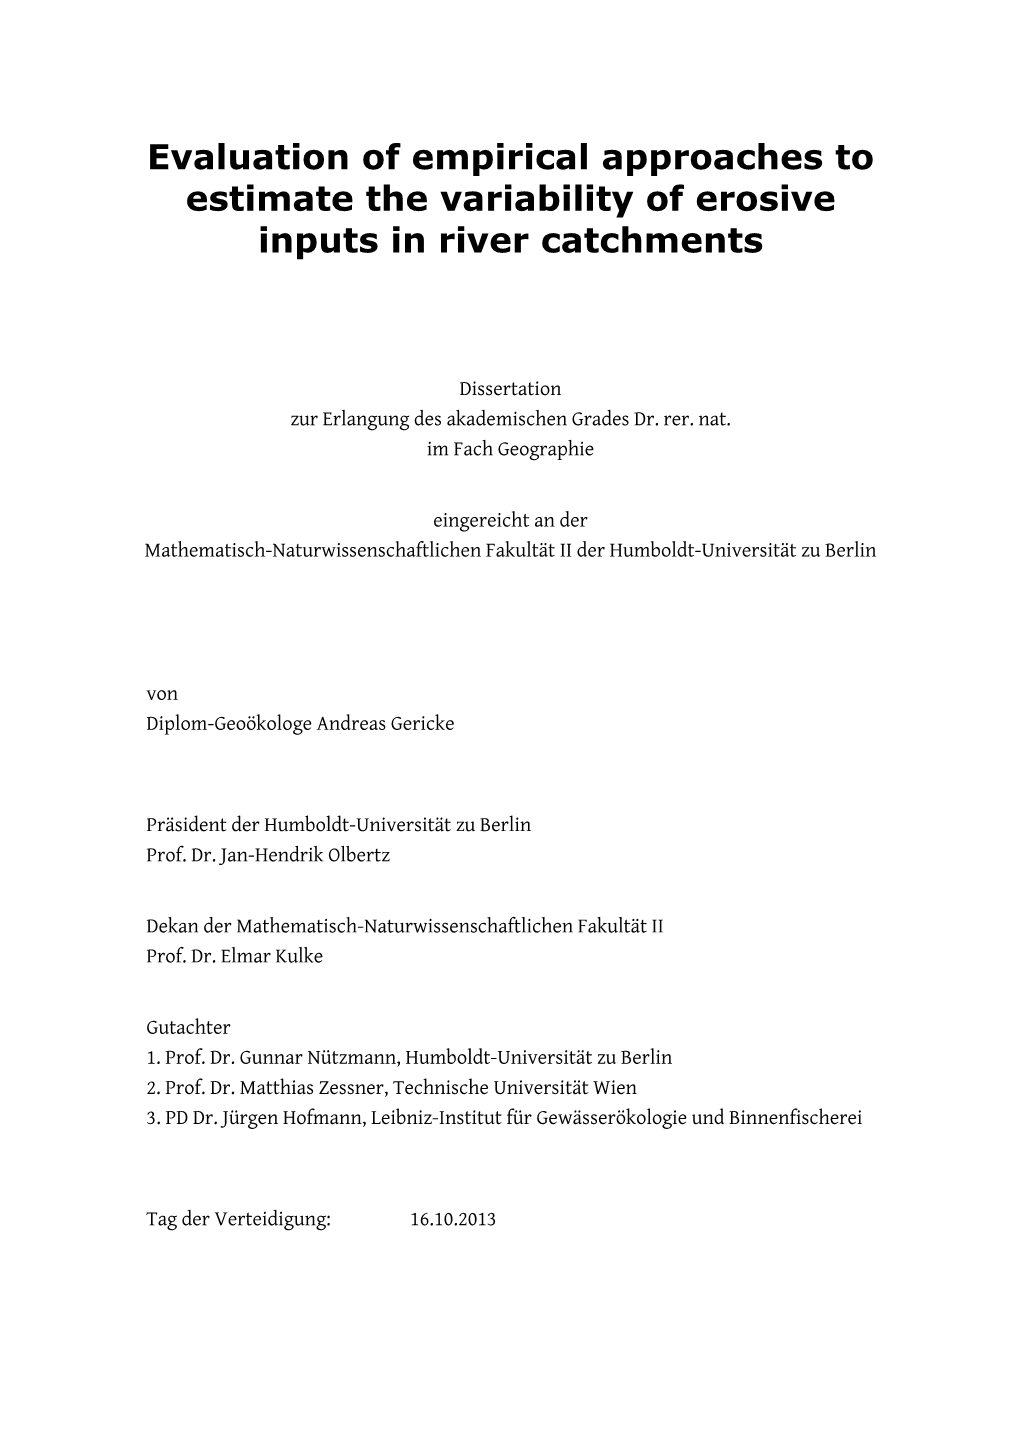 Evaluation of Empirical Approaches to Estimate the Variability of Erosive Inputs in River Catchments